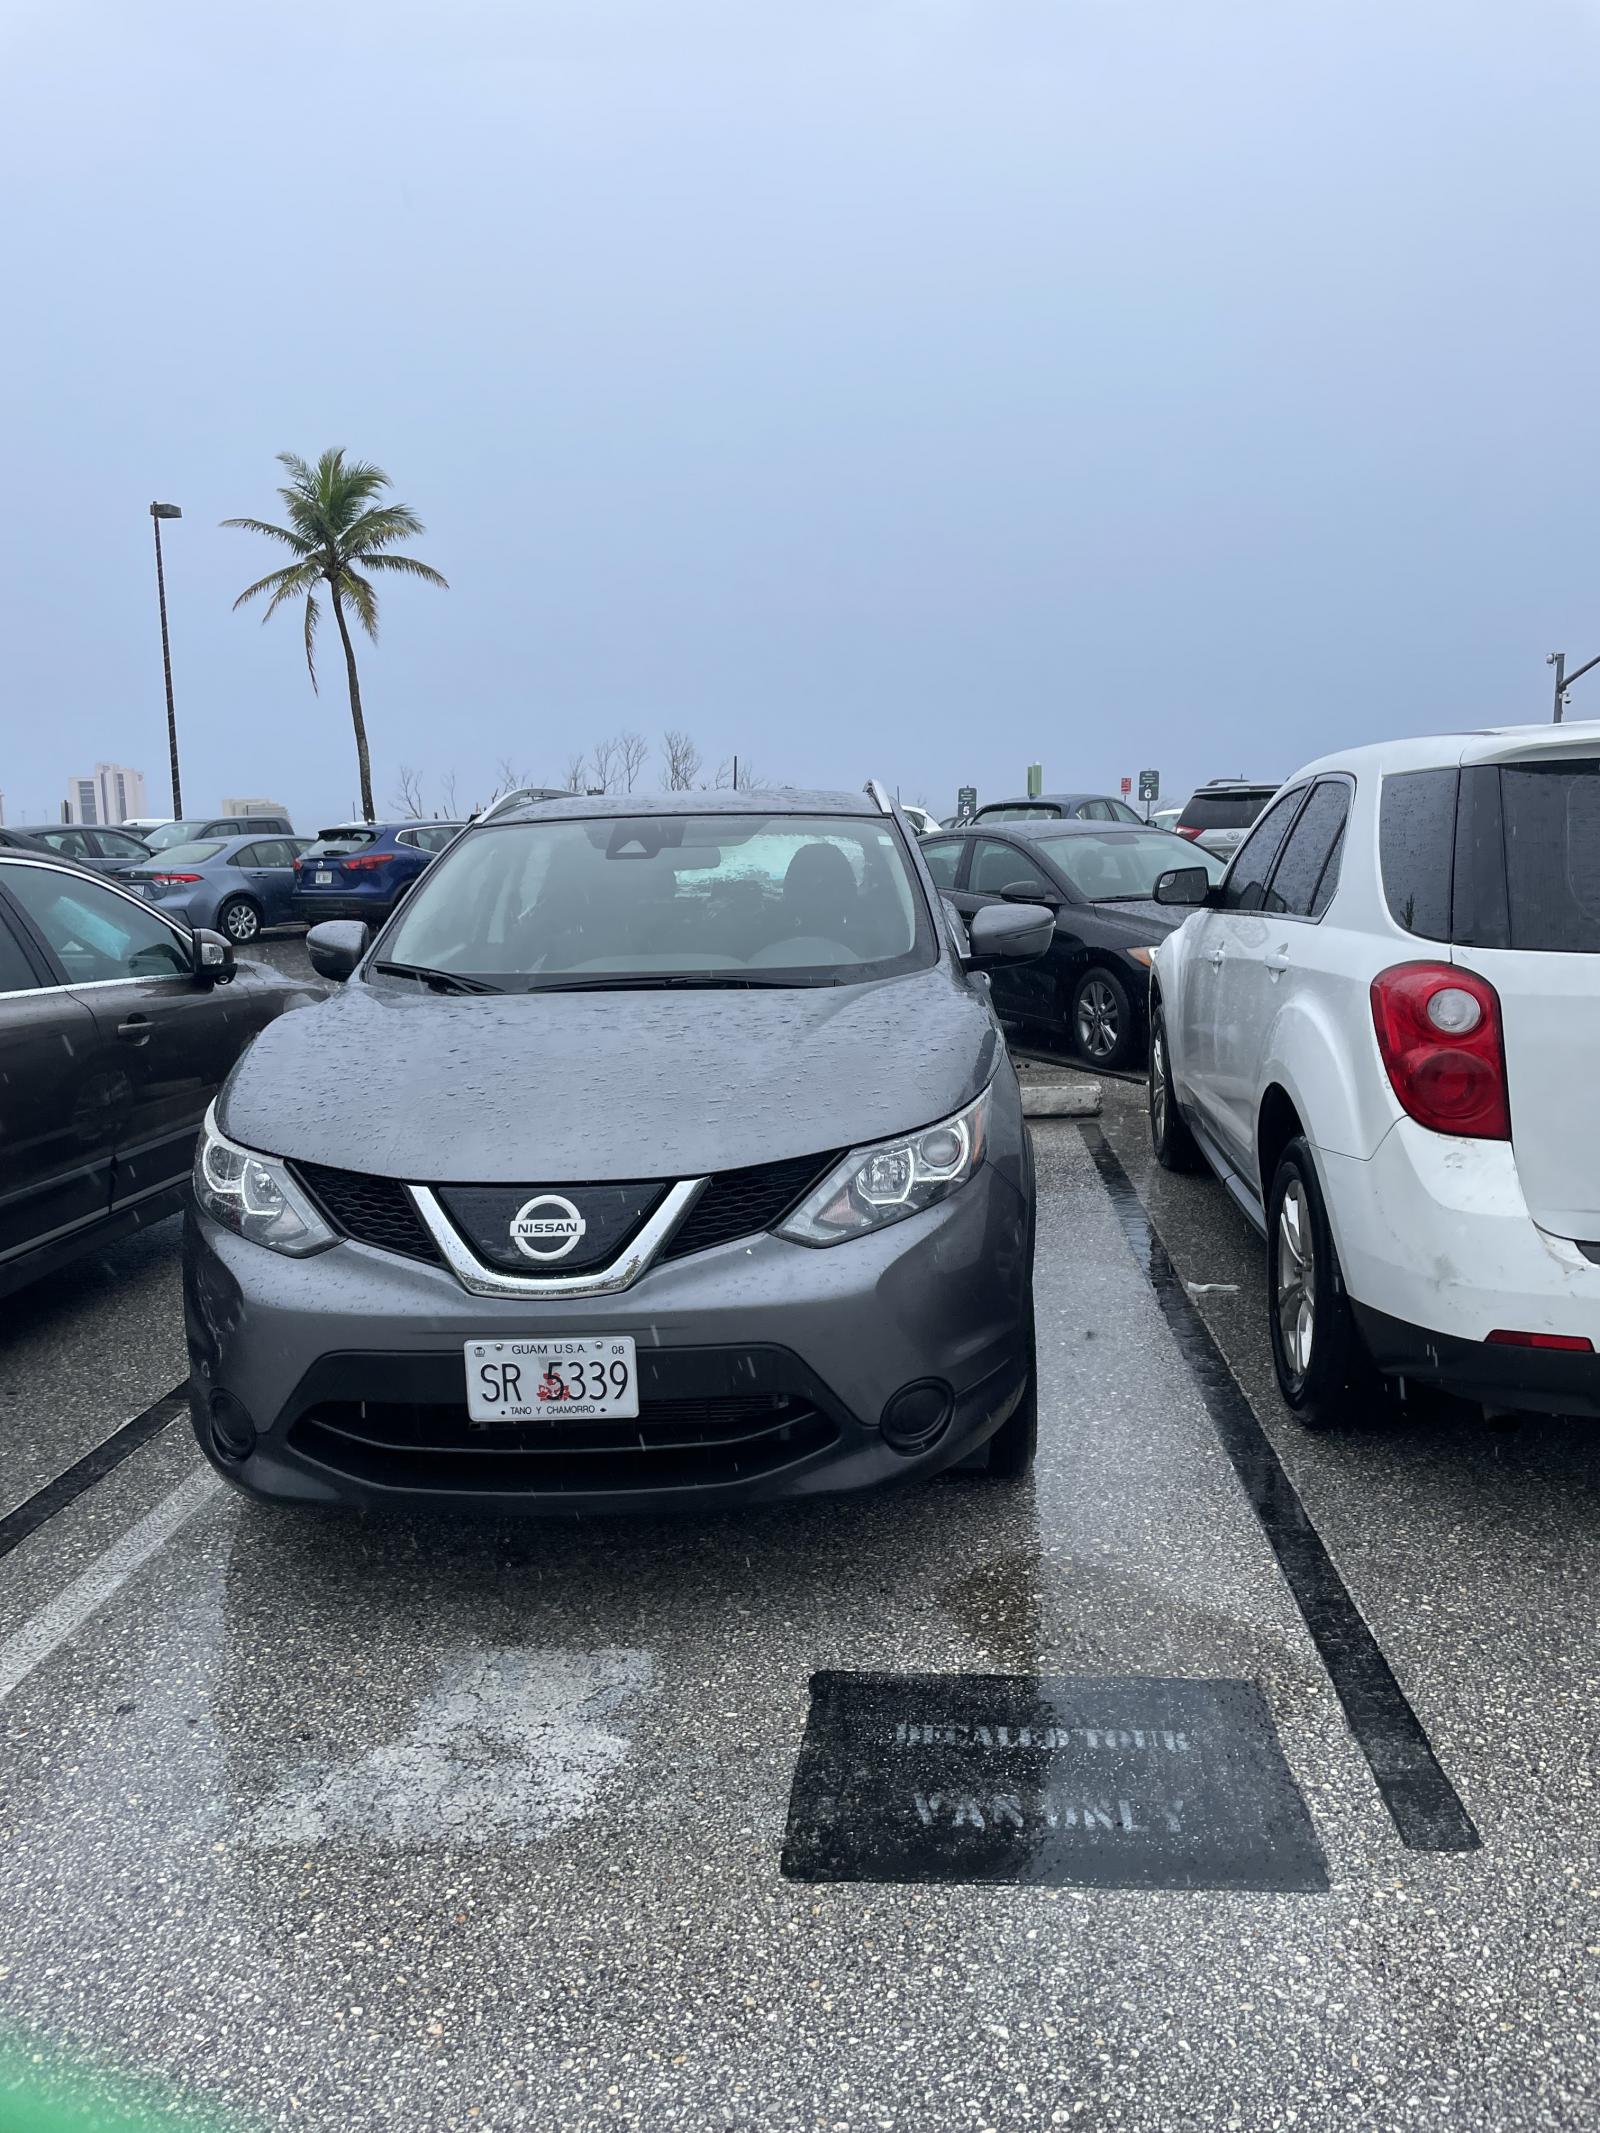 I used Nissan Rent a Car usefully during my stay in Guam due to Typhoon Mawar. Upgrading option for more than 3 days is so good